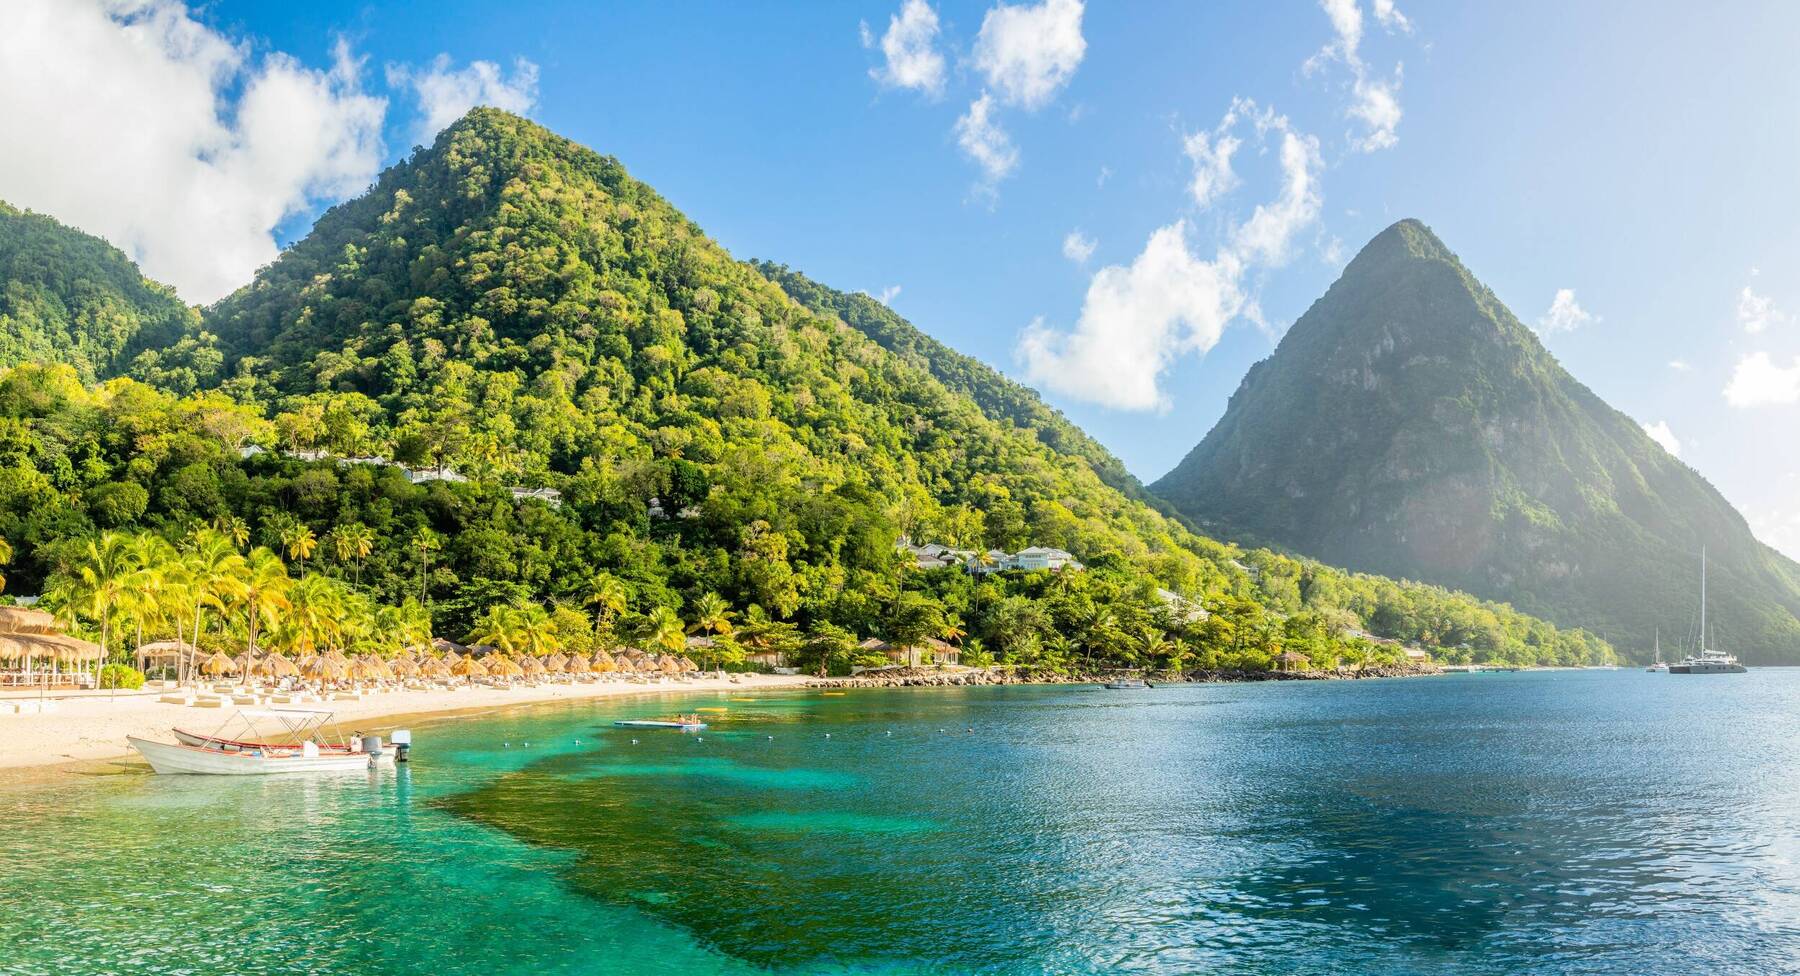 St Lucia - the Caribbean's most Captivating Island